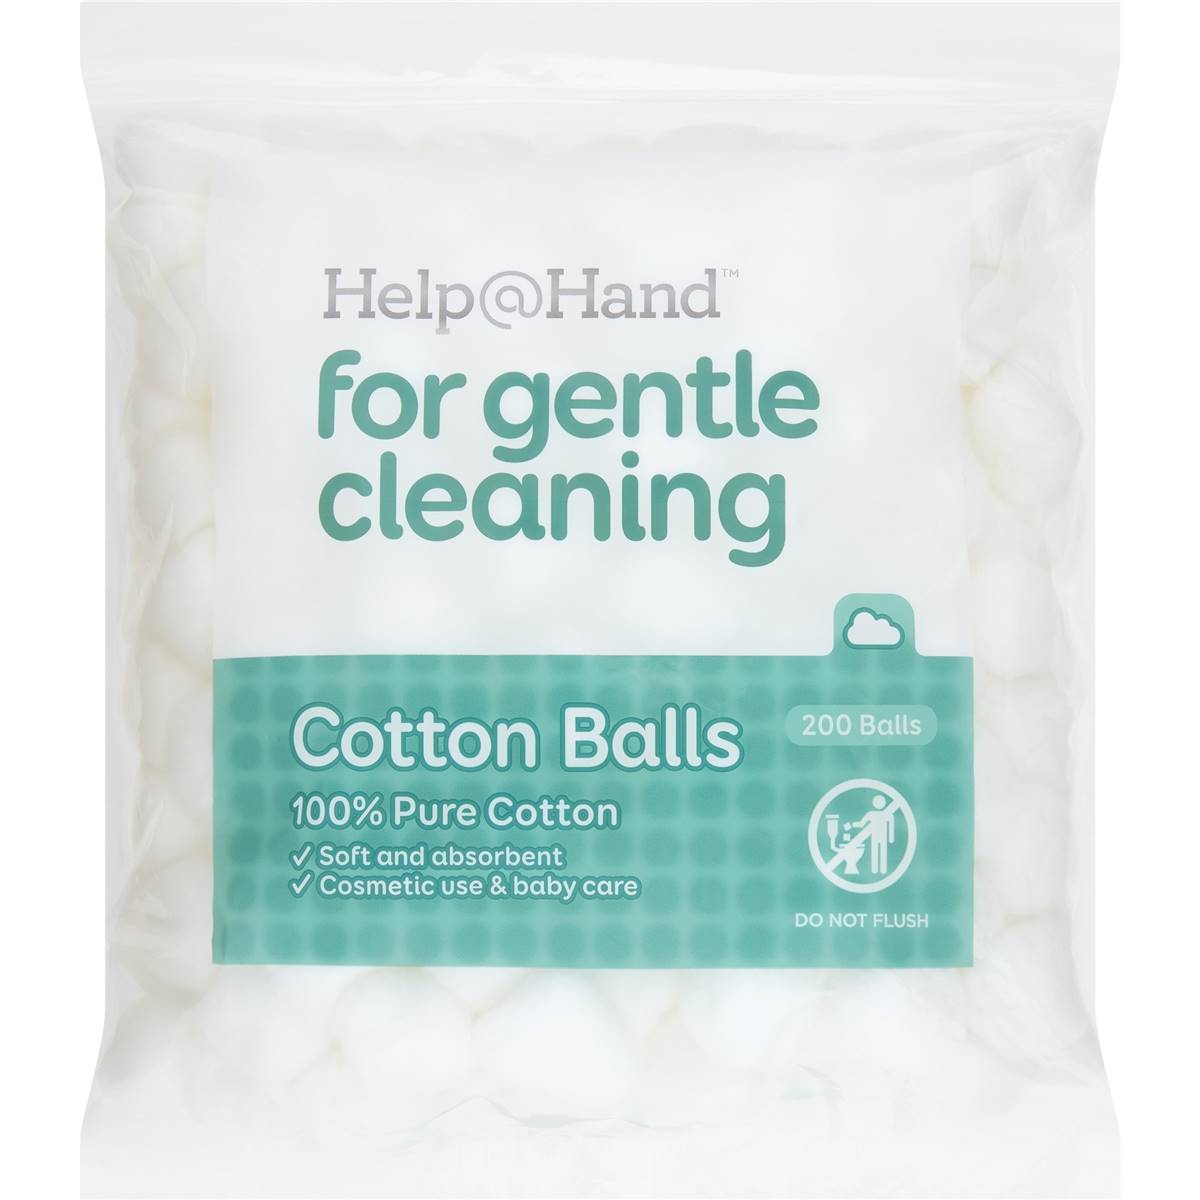 Woolworths Select Cotton Balls 